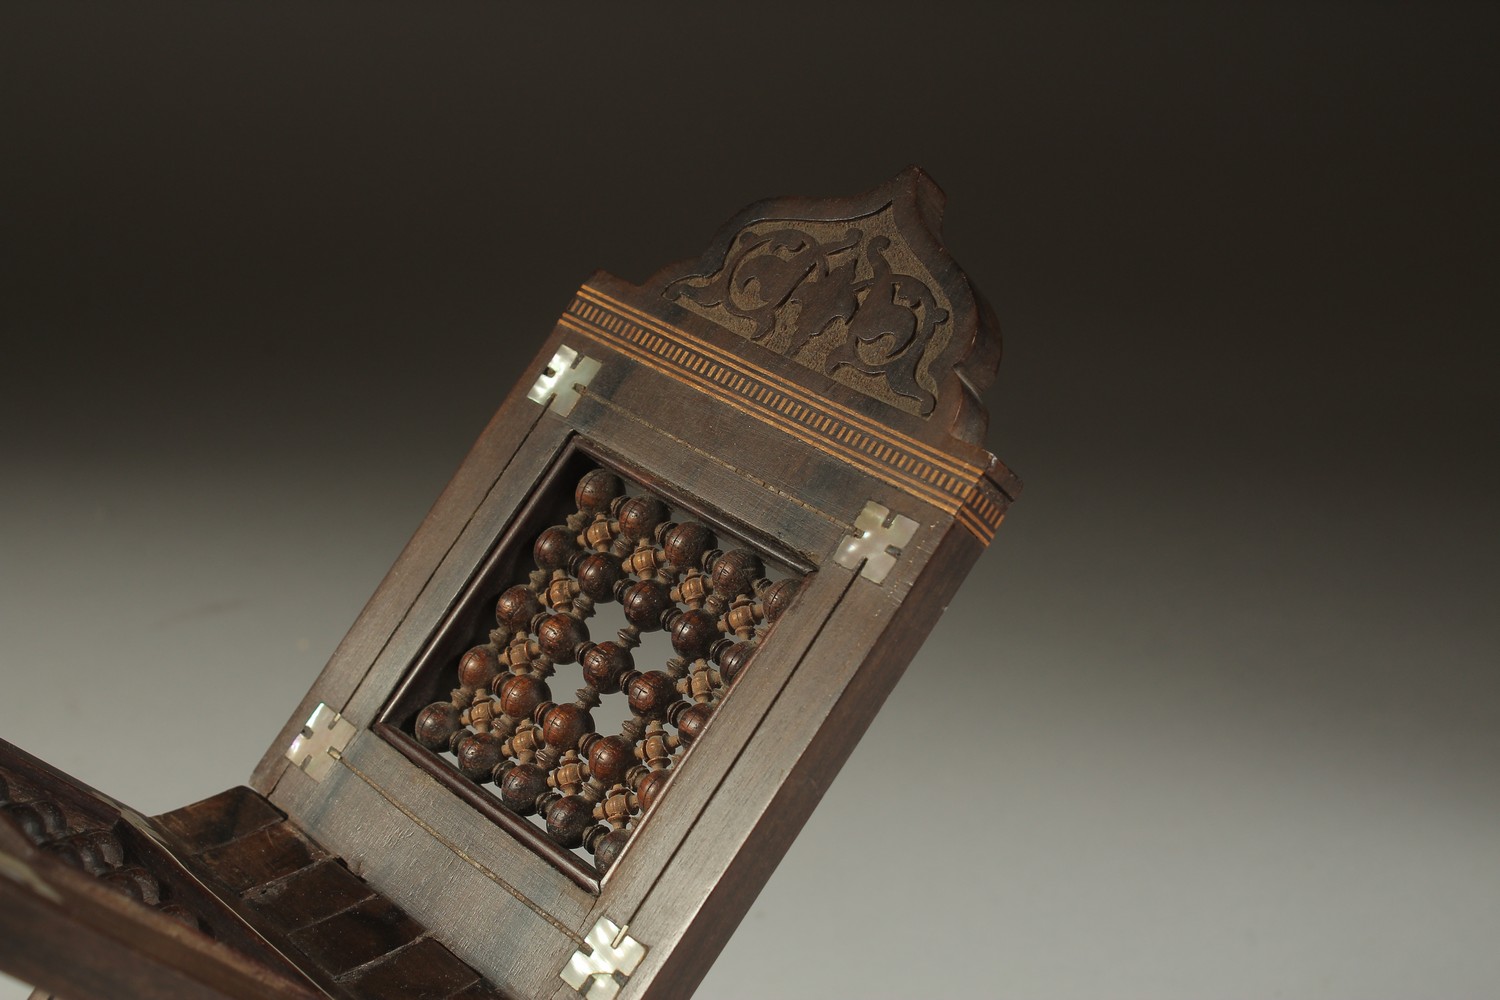 A FINE 19TH CENTURY MOTHER OF PEARL INLAID ENGRAVED WOODEN QURAN STAND - possibly Ottoman or - Image 3 of 5